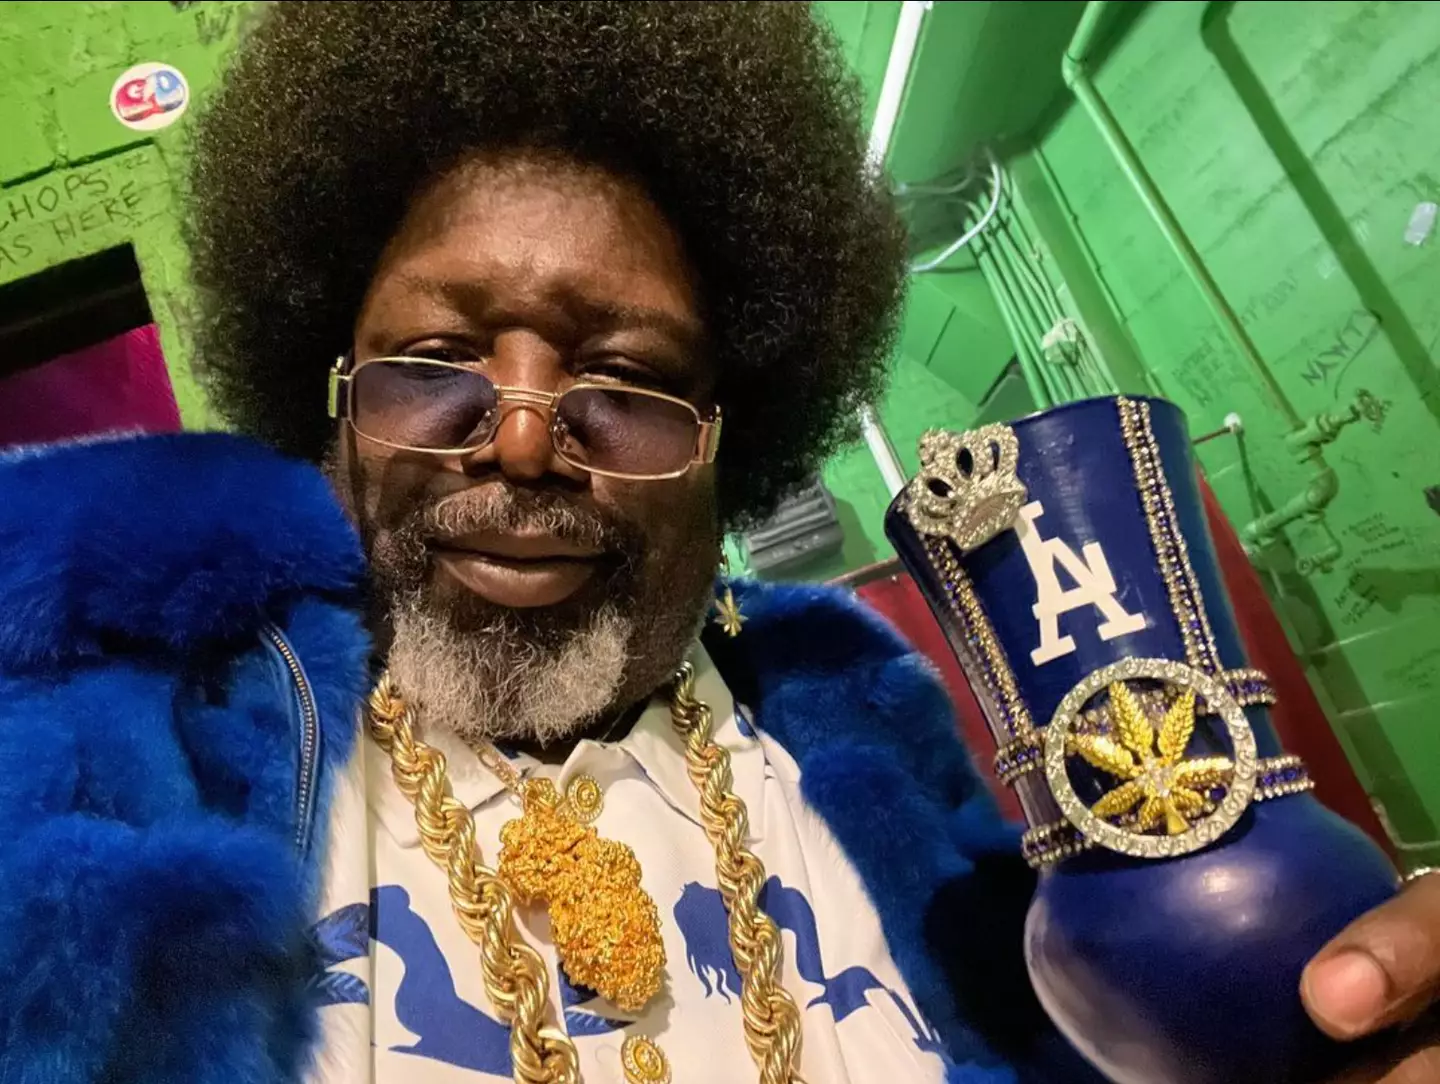 Afroman wants marijuana to be legalised across the United States.